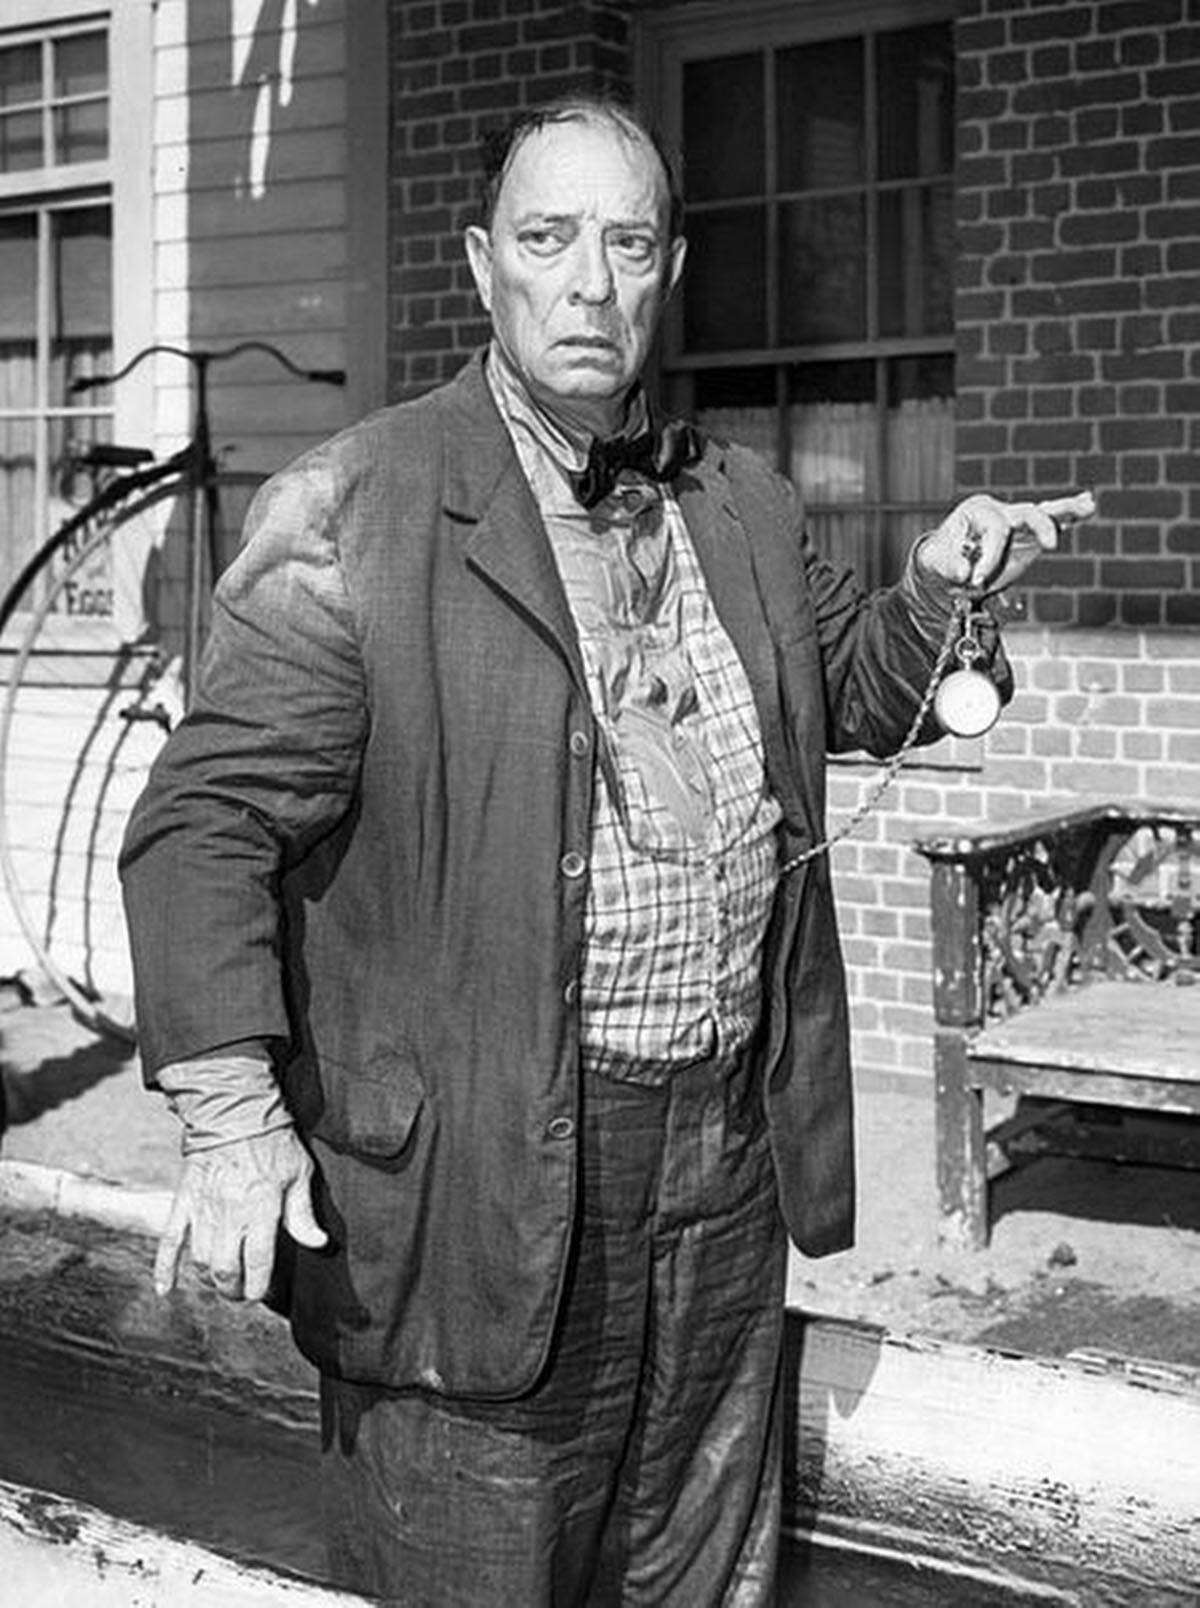 Photo of Buster Keaton from the television program The Twilight Zone. In this episode, "Once Upon a Time", Keaton played a man who was able to travel back and forth in time with a magical helmet. Keaton performed some of his scenes for the episode as a silent performer, as in his old film days. (1961)